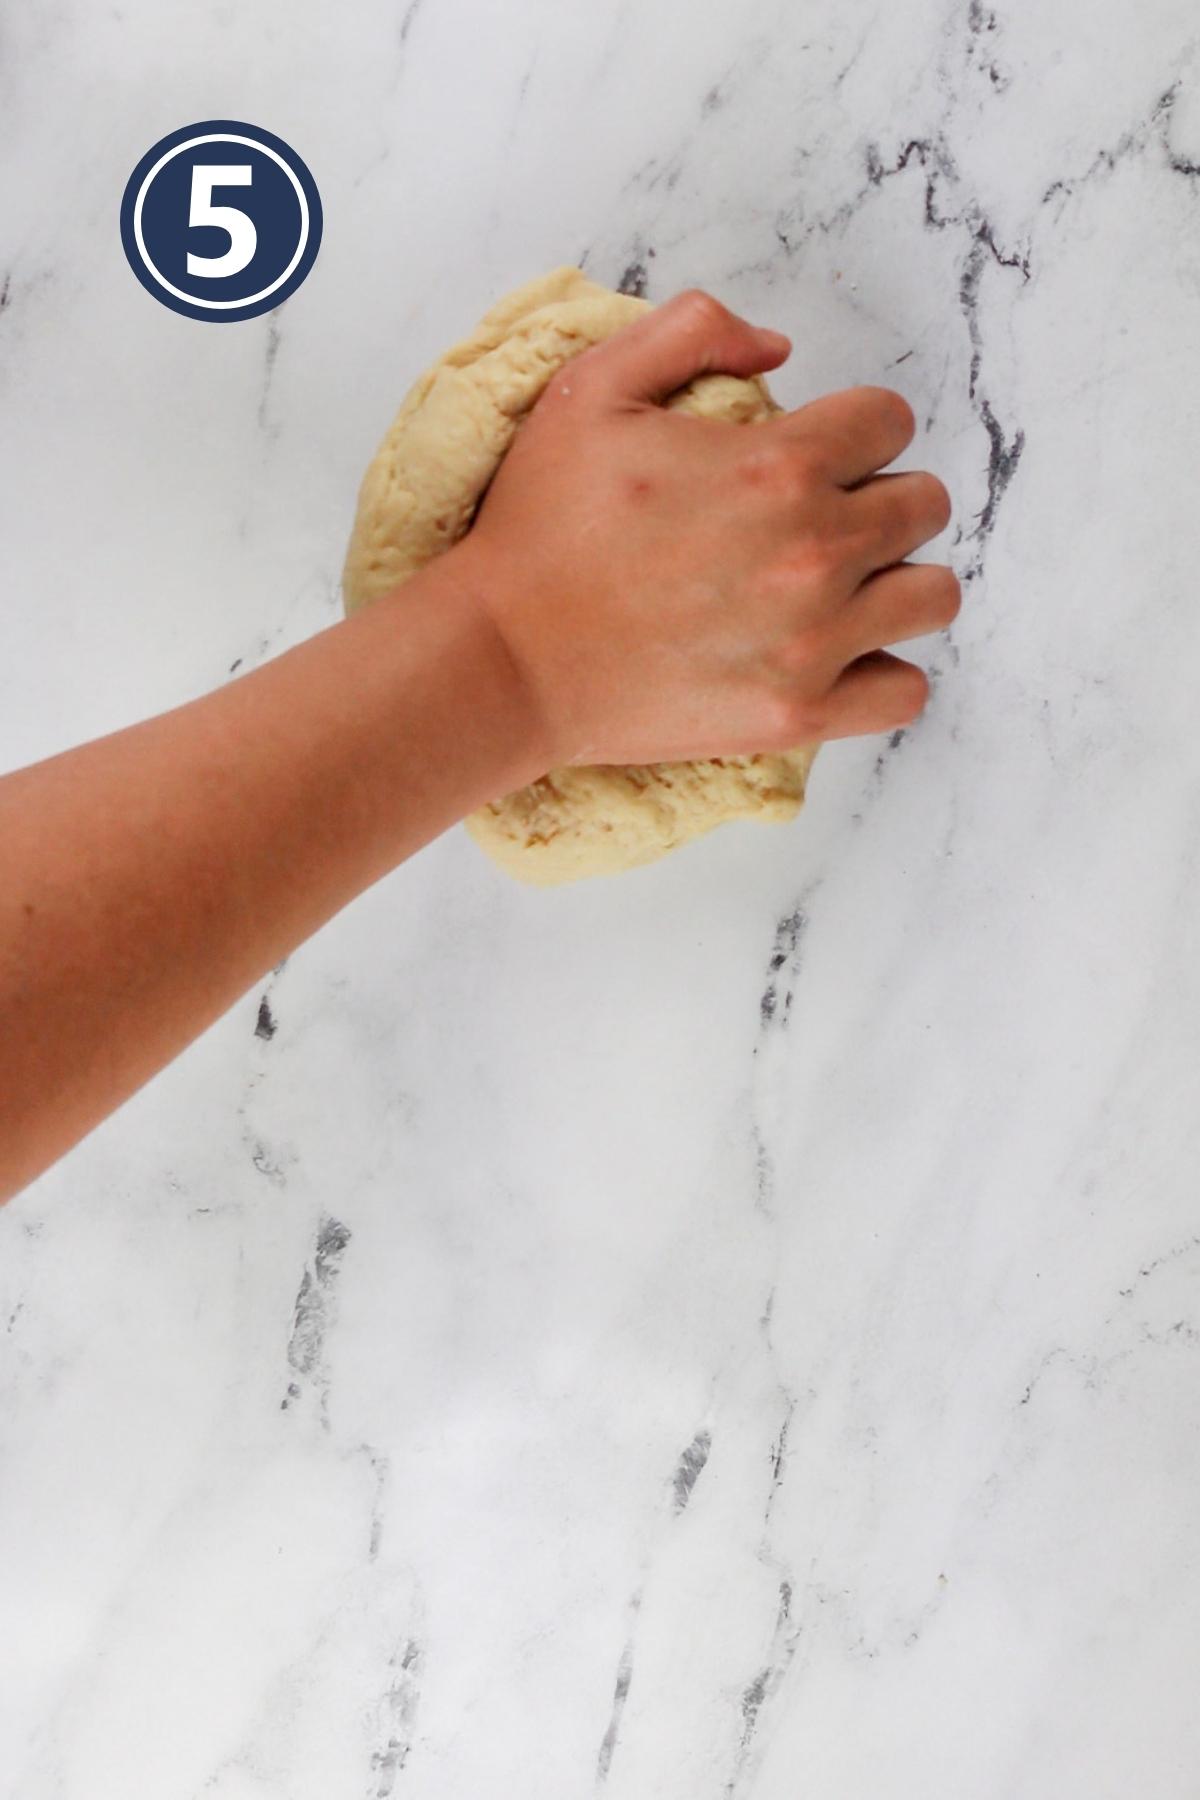 kneading the dough with hand on the counter.